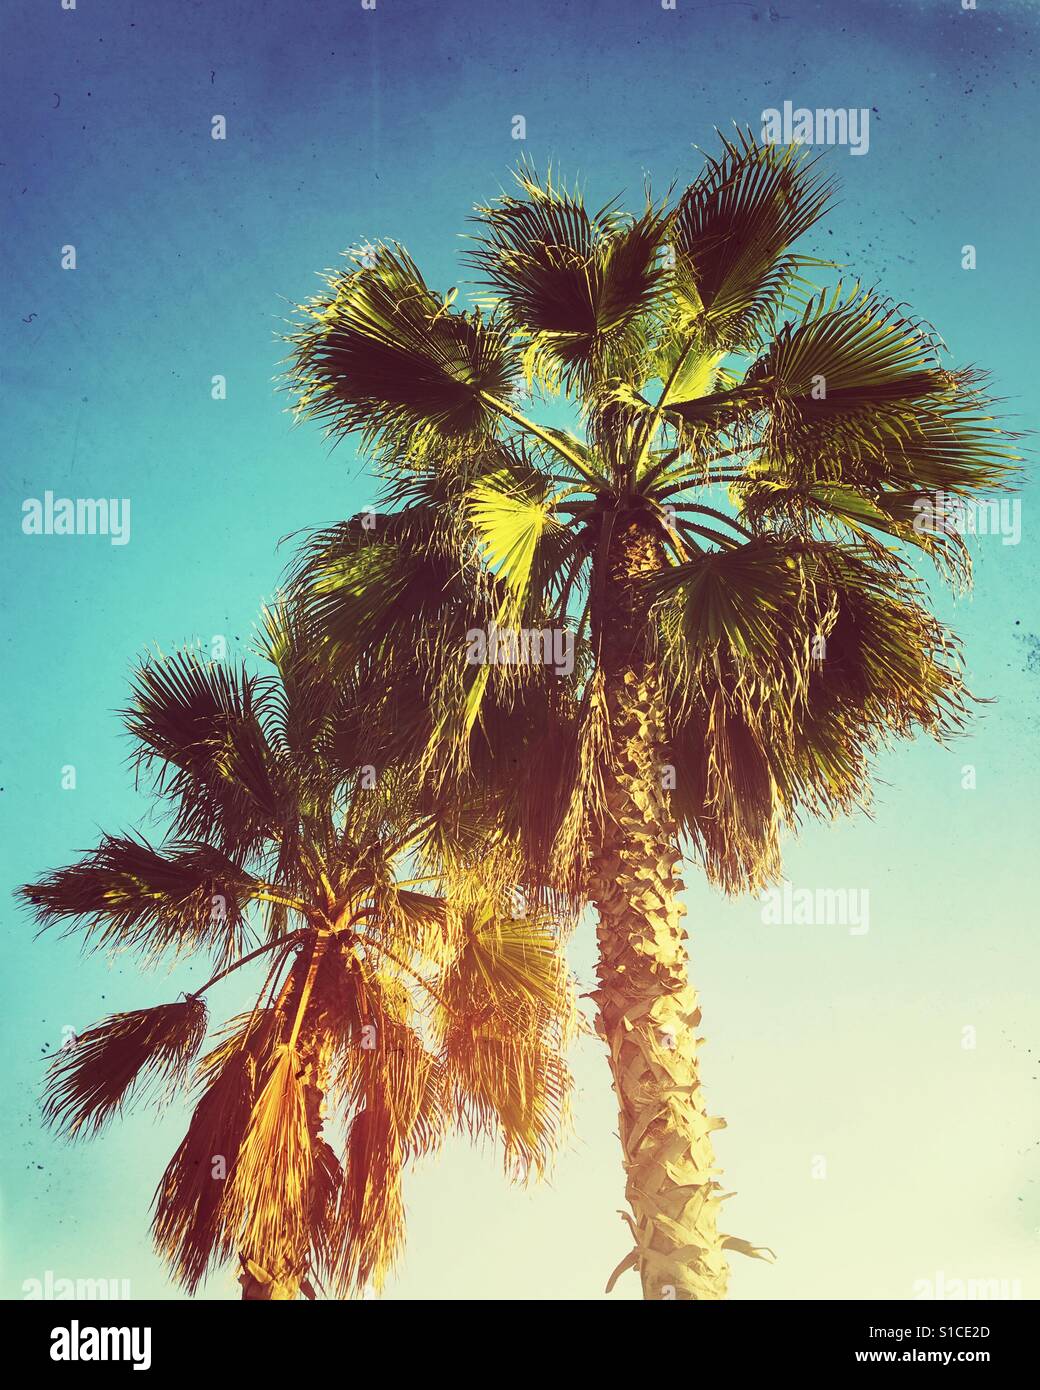 Two palm trees in the evening setting sun. Retro edit with light leaks. Stock Photo